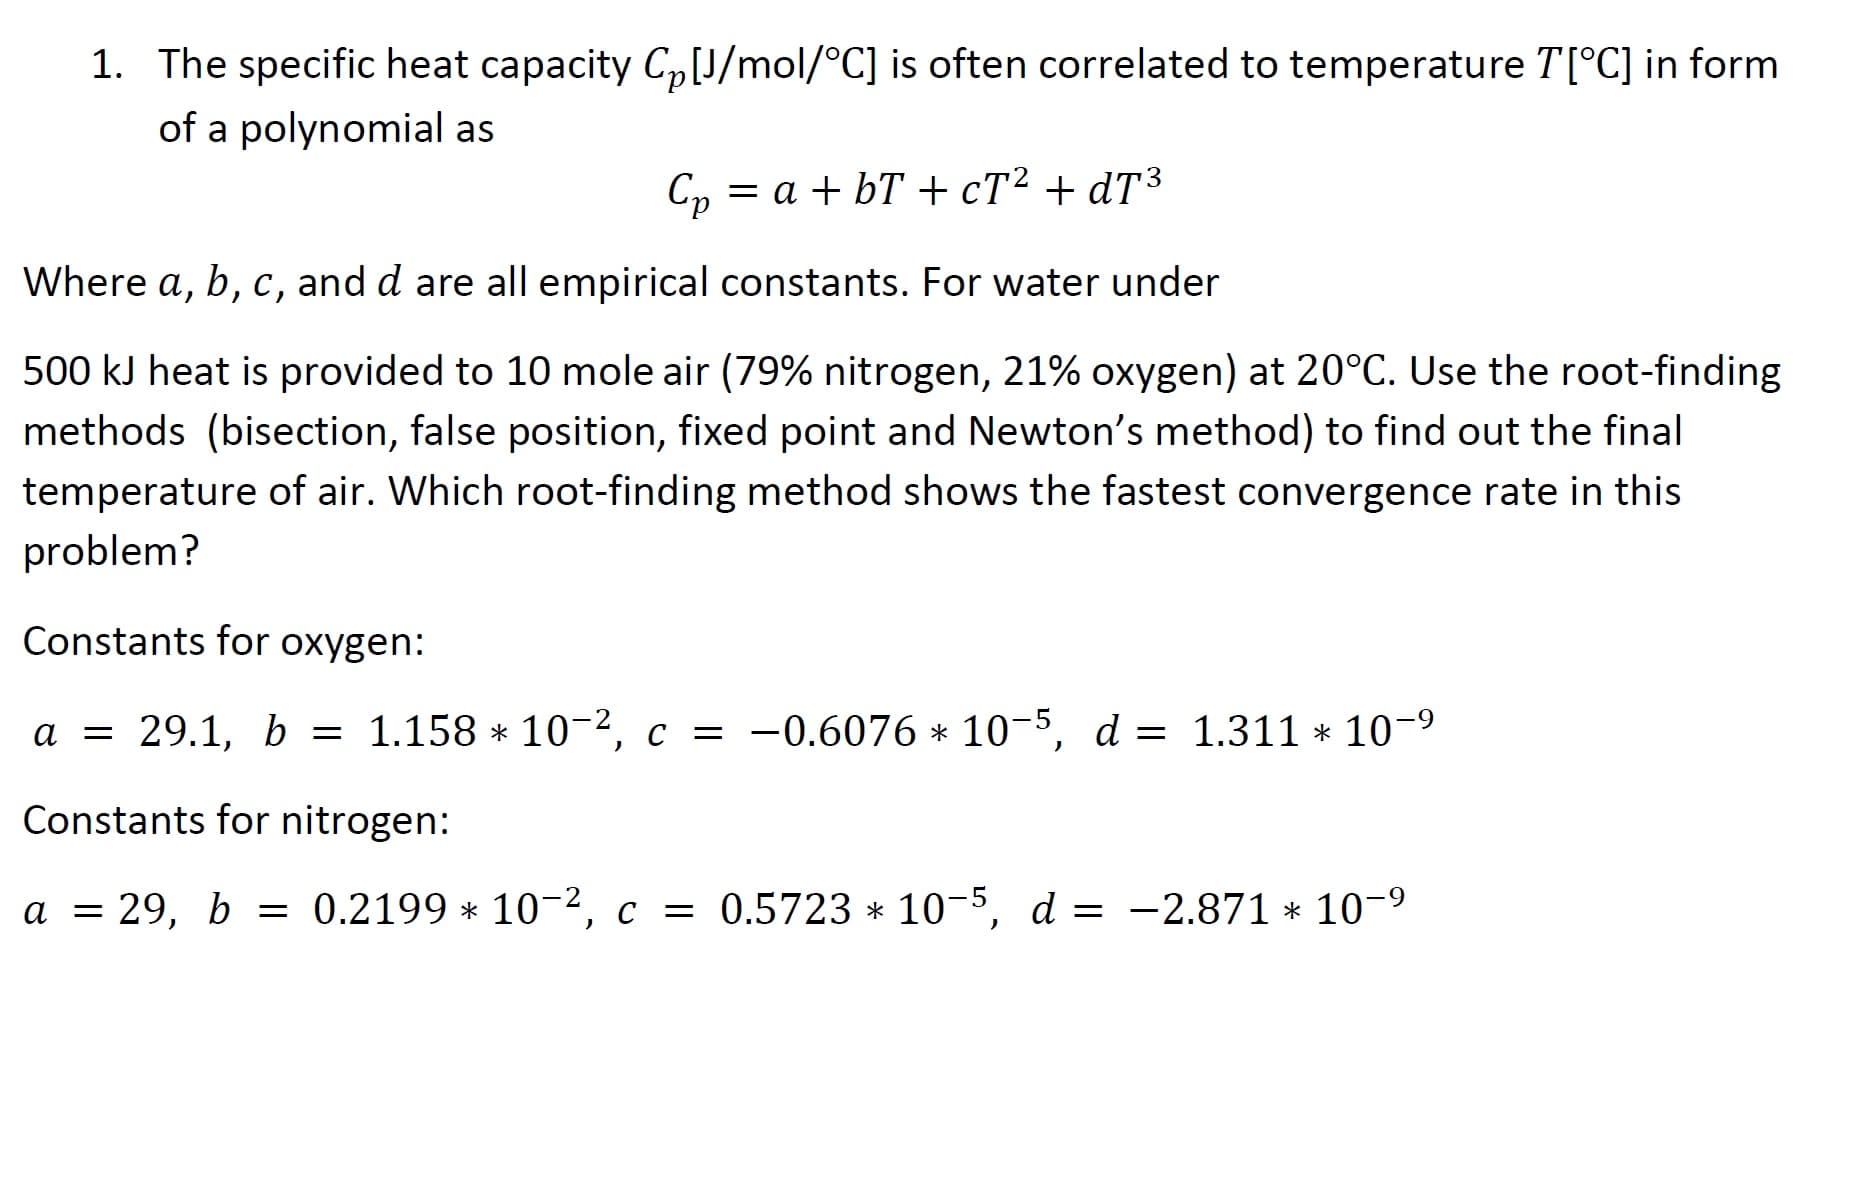 1. The specific heat capacity C,J/mol/°C] is often correlated to temperature T[°C] in form
of a polynomial as
C, = a + bT + cT² + dT³
Where a, b, c, and d are all empirical constants. For water under
500 kJ heat is provided to 10 mole air (79% nitrogen, 21% oxygen) at 20°C. Use the root-finding
methods (bisection, false position, fixed point and Newton's method) to find out the final
temperature of air. Which root-finding method shows the fastest convergence rate in this
problem?
Constants for oxygen:
a = 29.1, b = 1.158 * 10-2, c = -0.6076 * 10-5, d = 1.311 * 10-9
Constants for nitrogen:
a = 29, b = 0.2199 * 10-2, c = 0.5723 * 10-5, d = -2.871 * 10-9
